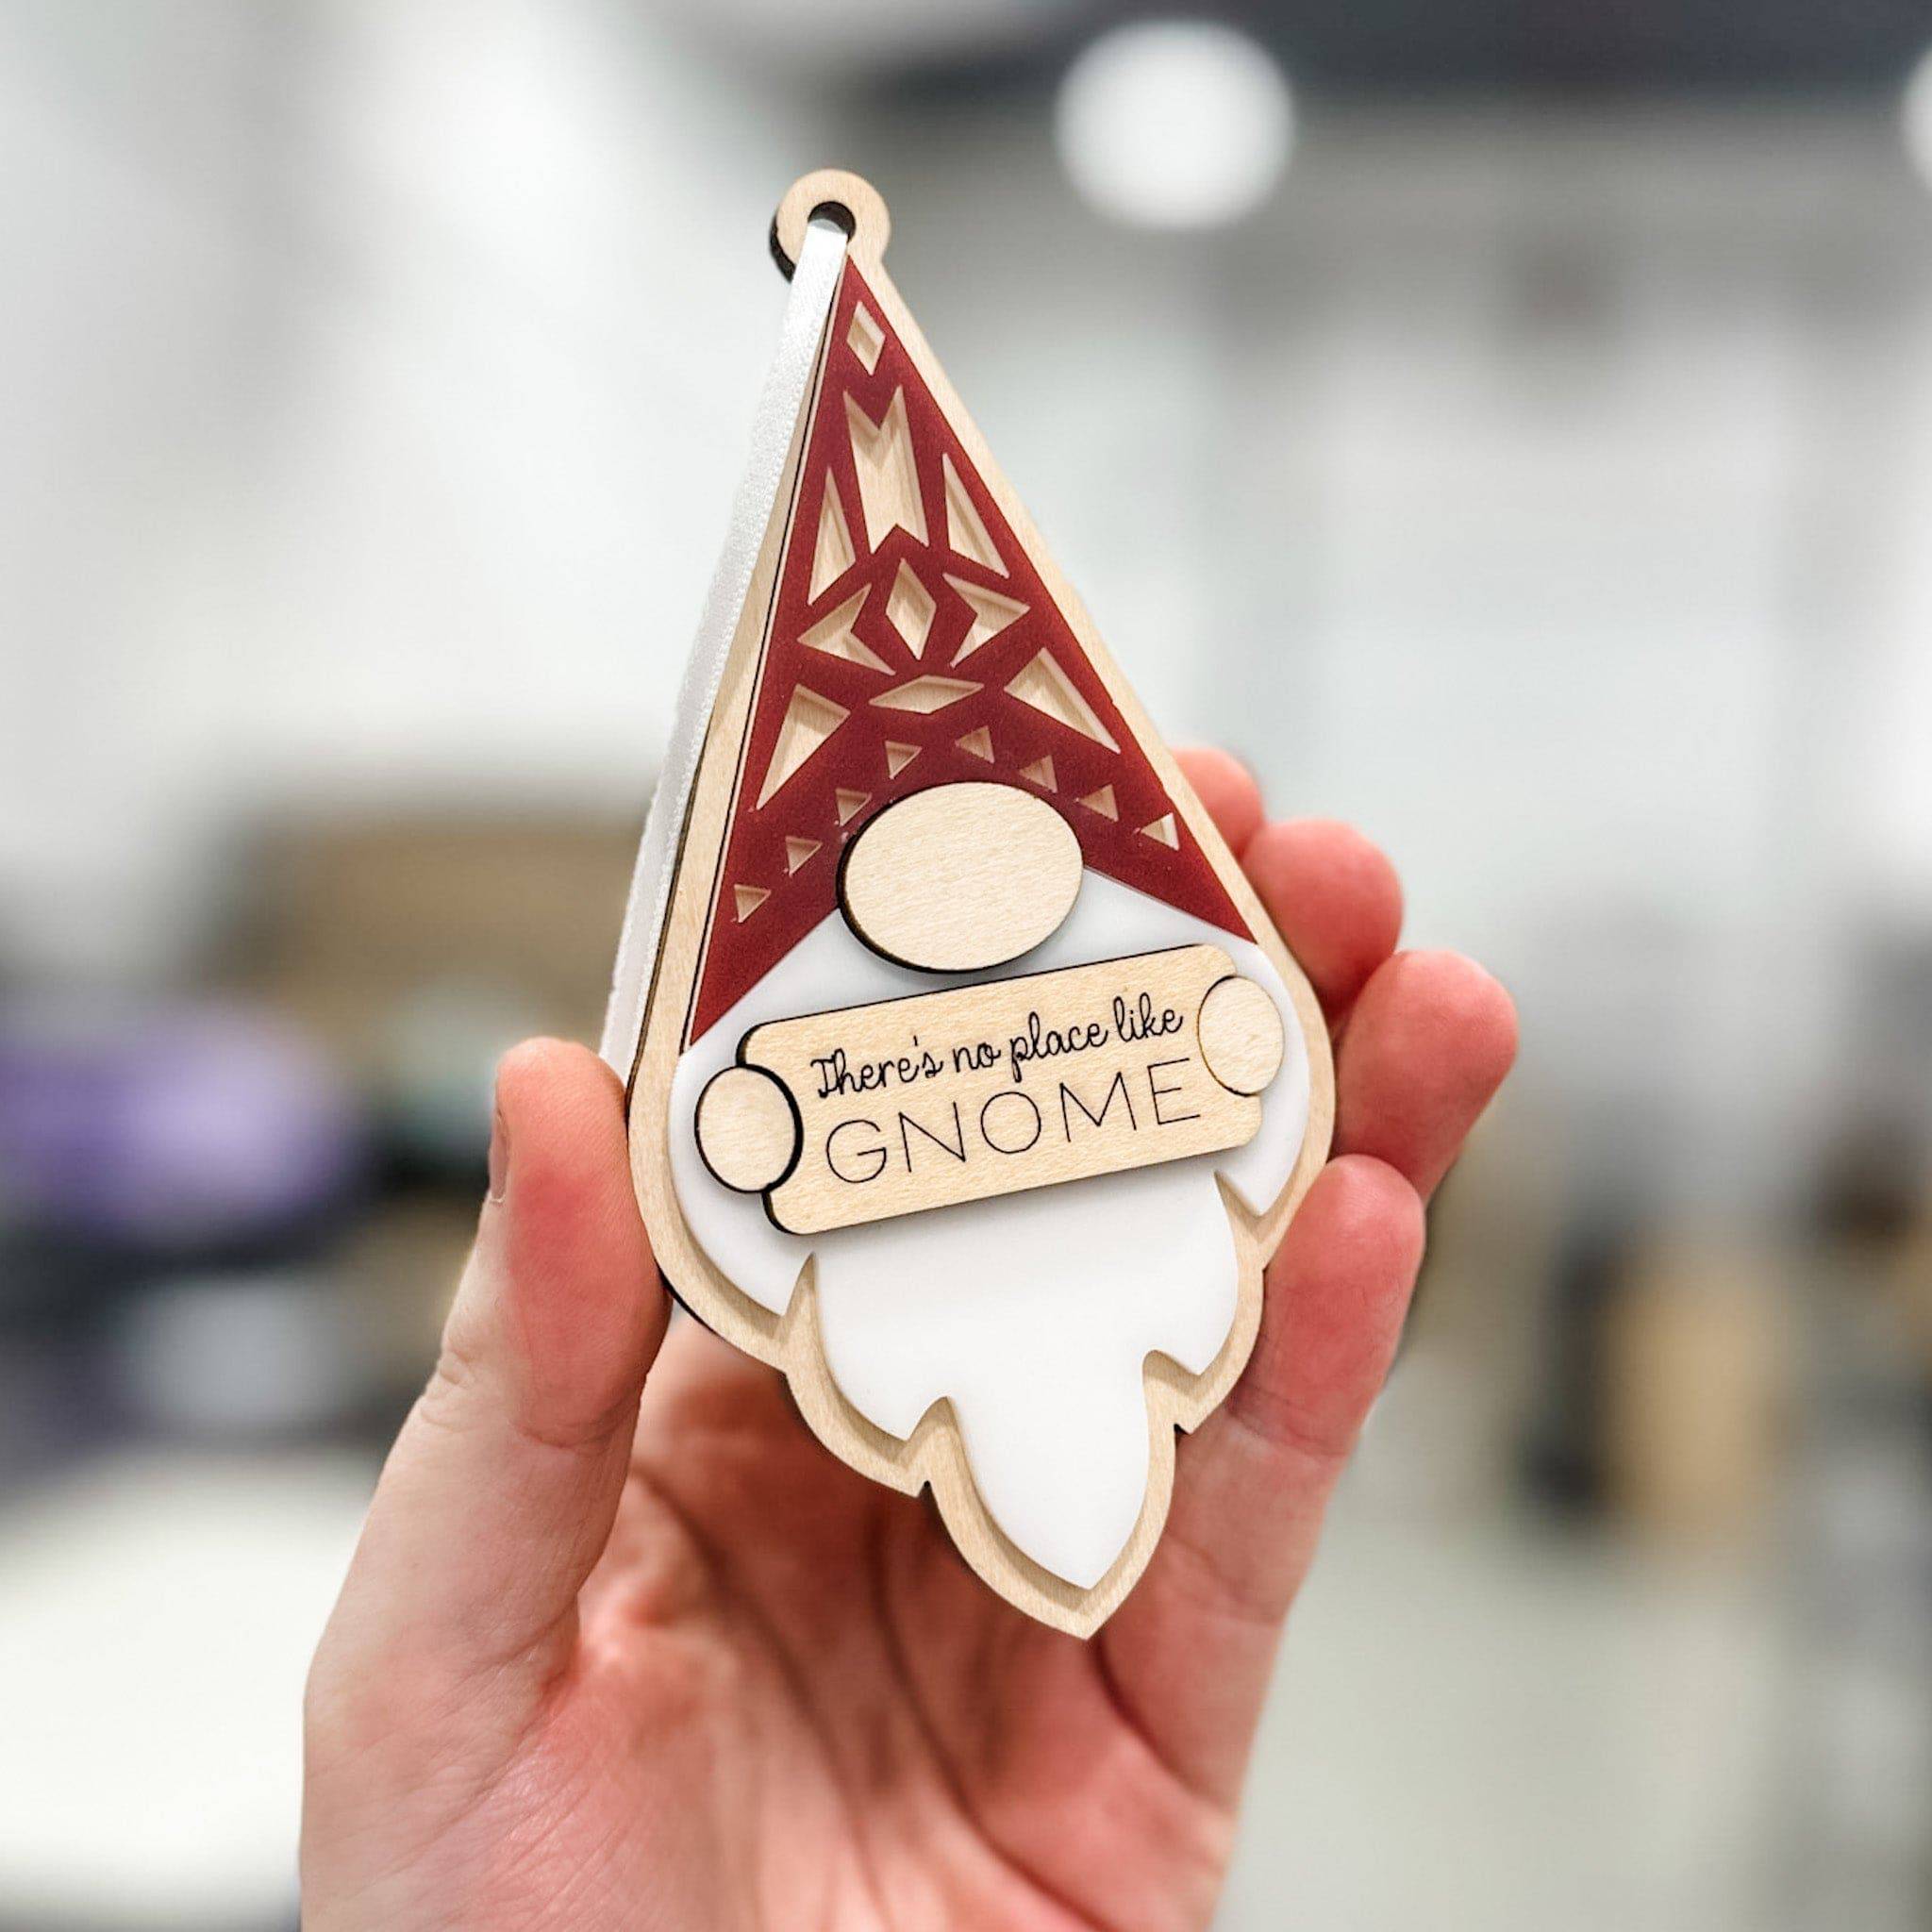 There's No Place Like Gnome 3D Wood & Acrylic Ornament - Sticks & Doodles